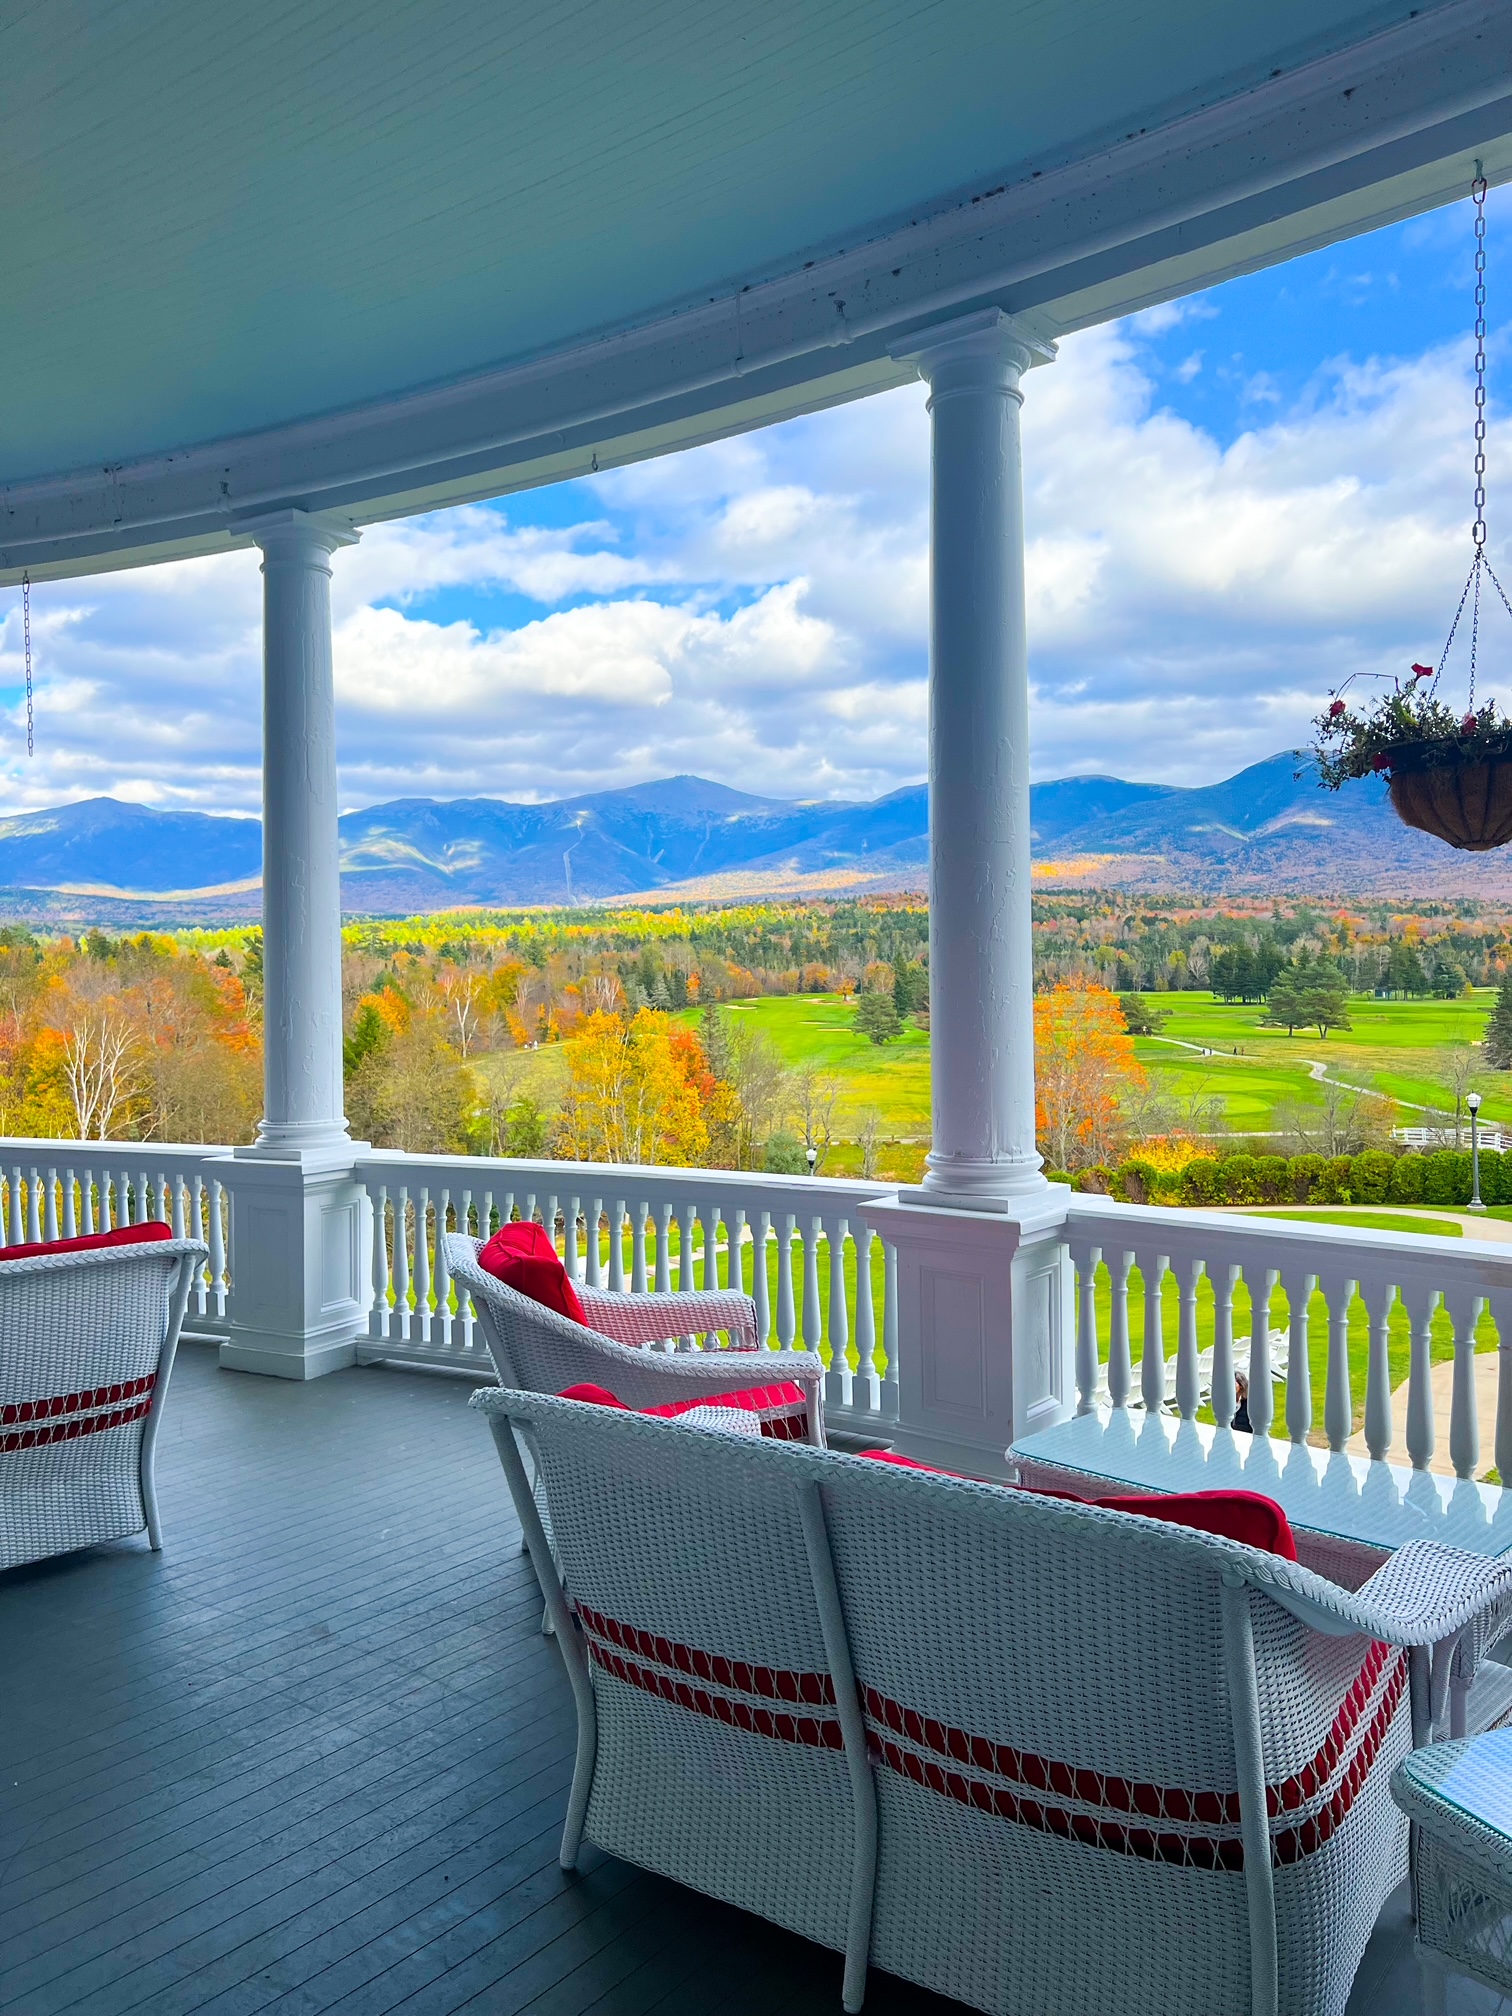 The Omni Mount Washington Resort offers stunning views of New Hampshire: You can see the mountains, the blue skies, the clouds, and the landscape of the green grounds coupled with the fall foliage trees from the back porch of this hotel. 